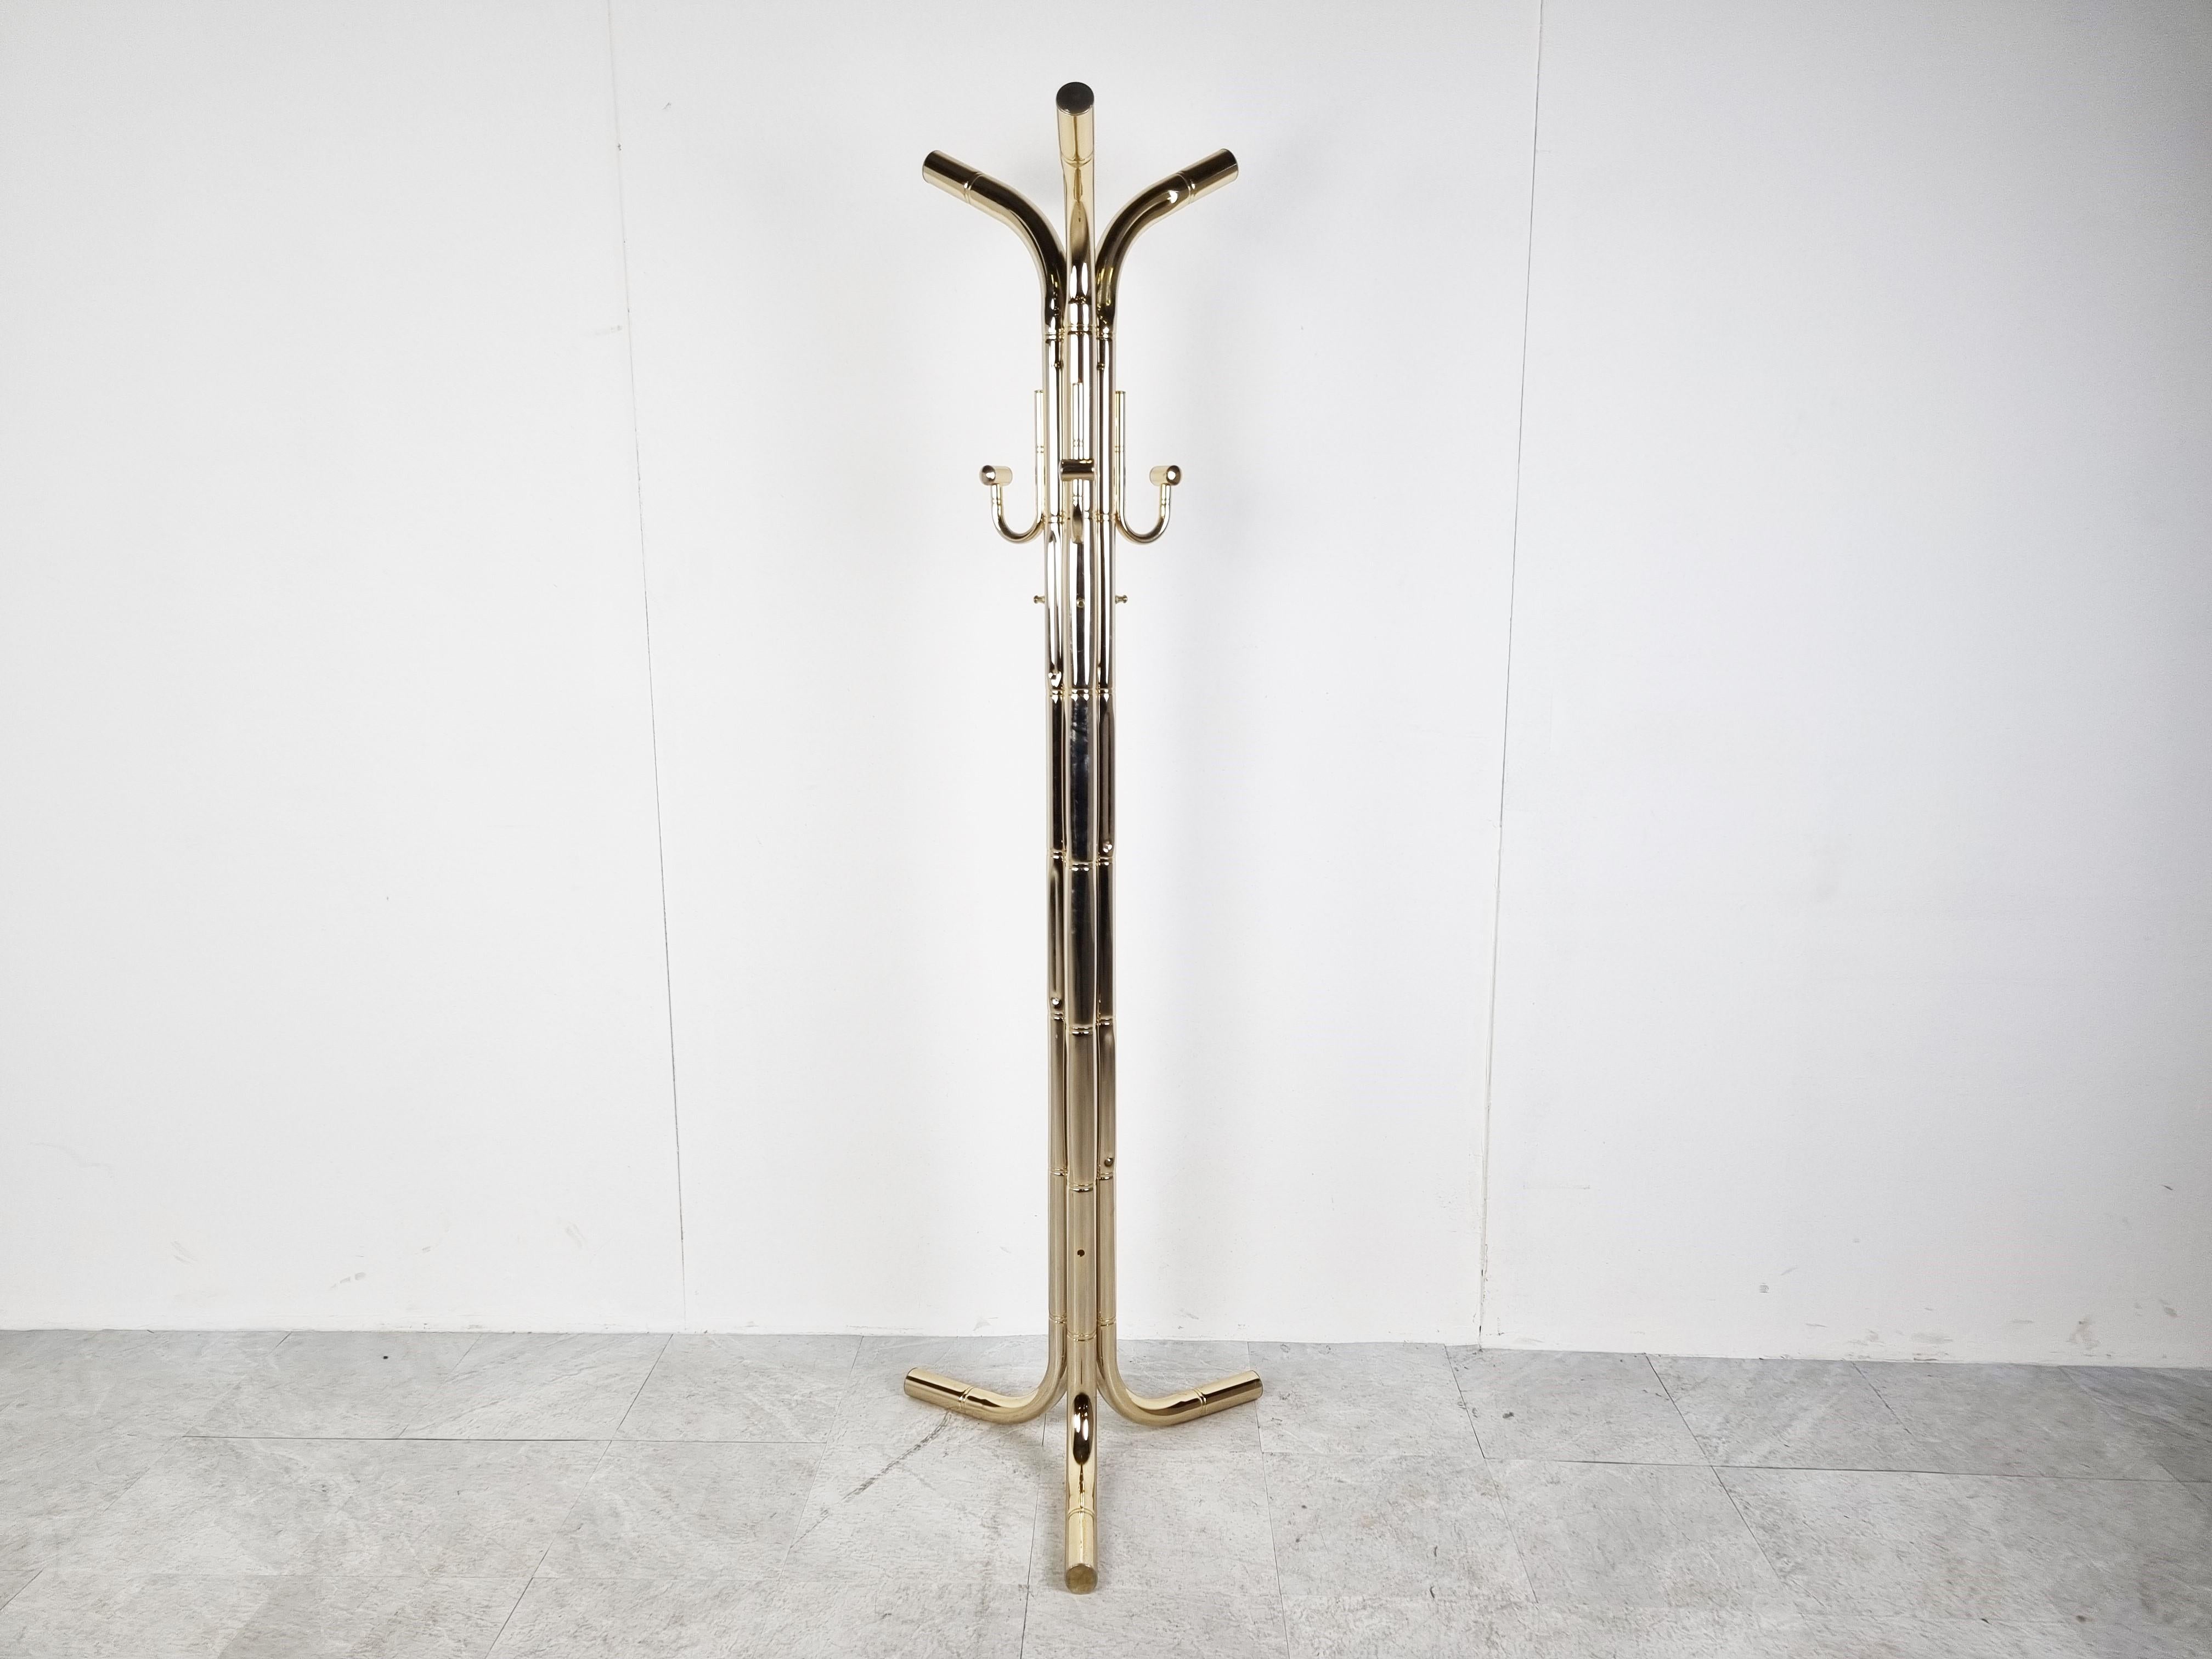 Vintage brass faux bamboo coat stand.

Elegant design.

Good condition

1970s - Belgium

Dimensions:
Height: 175cm/68.89